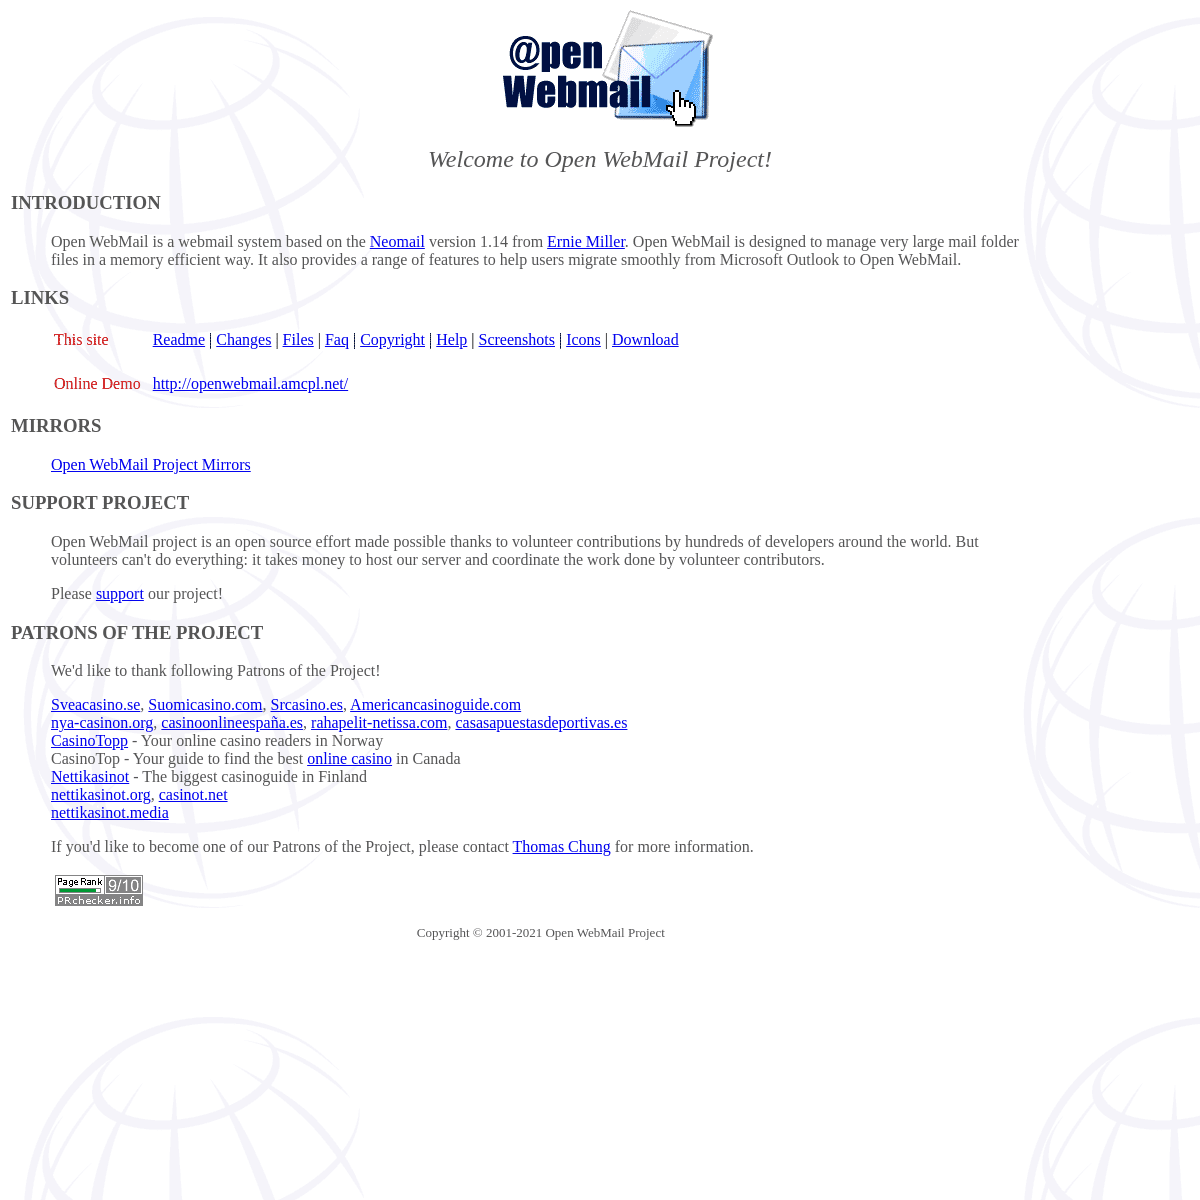 A complete backup of https://openwebmail.org